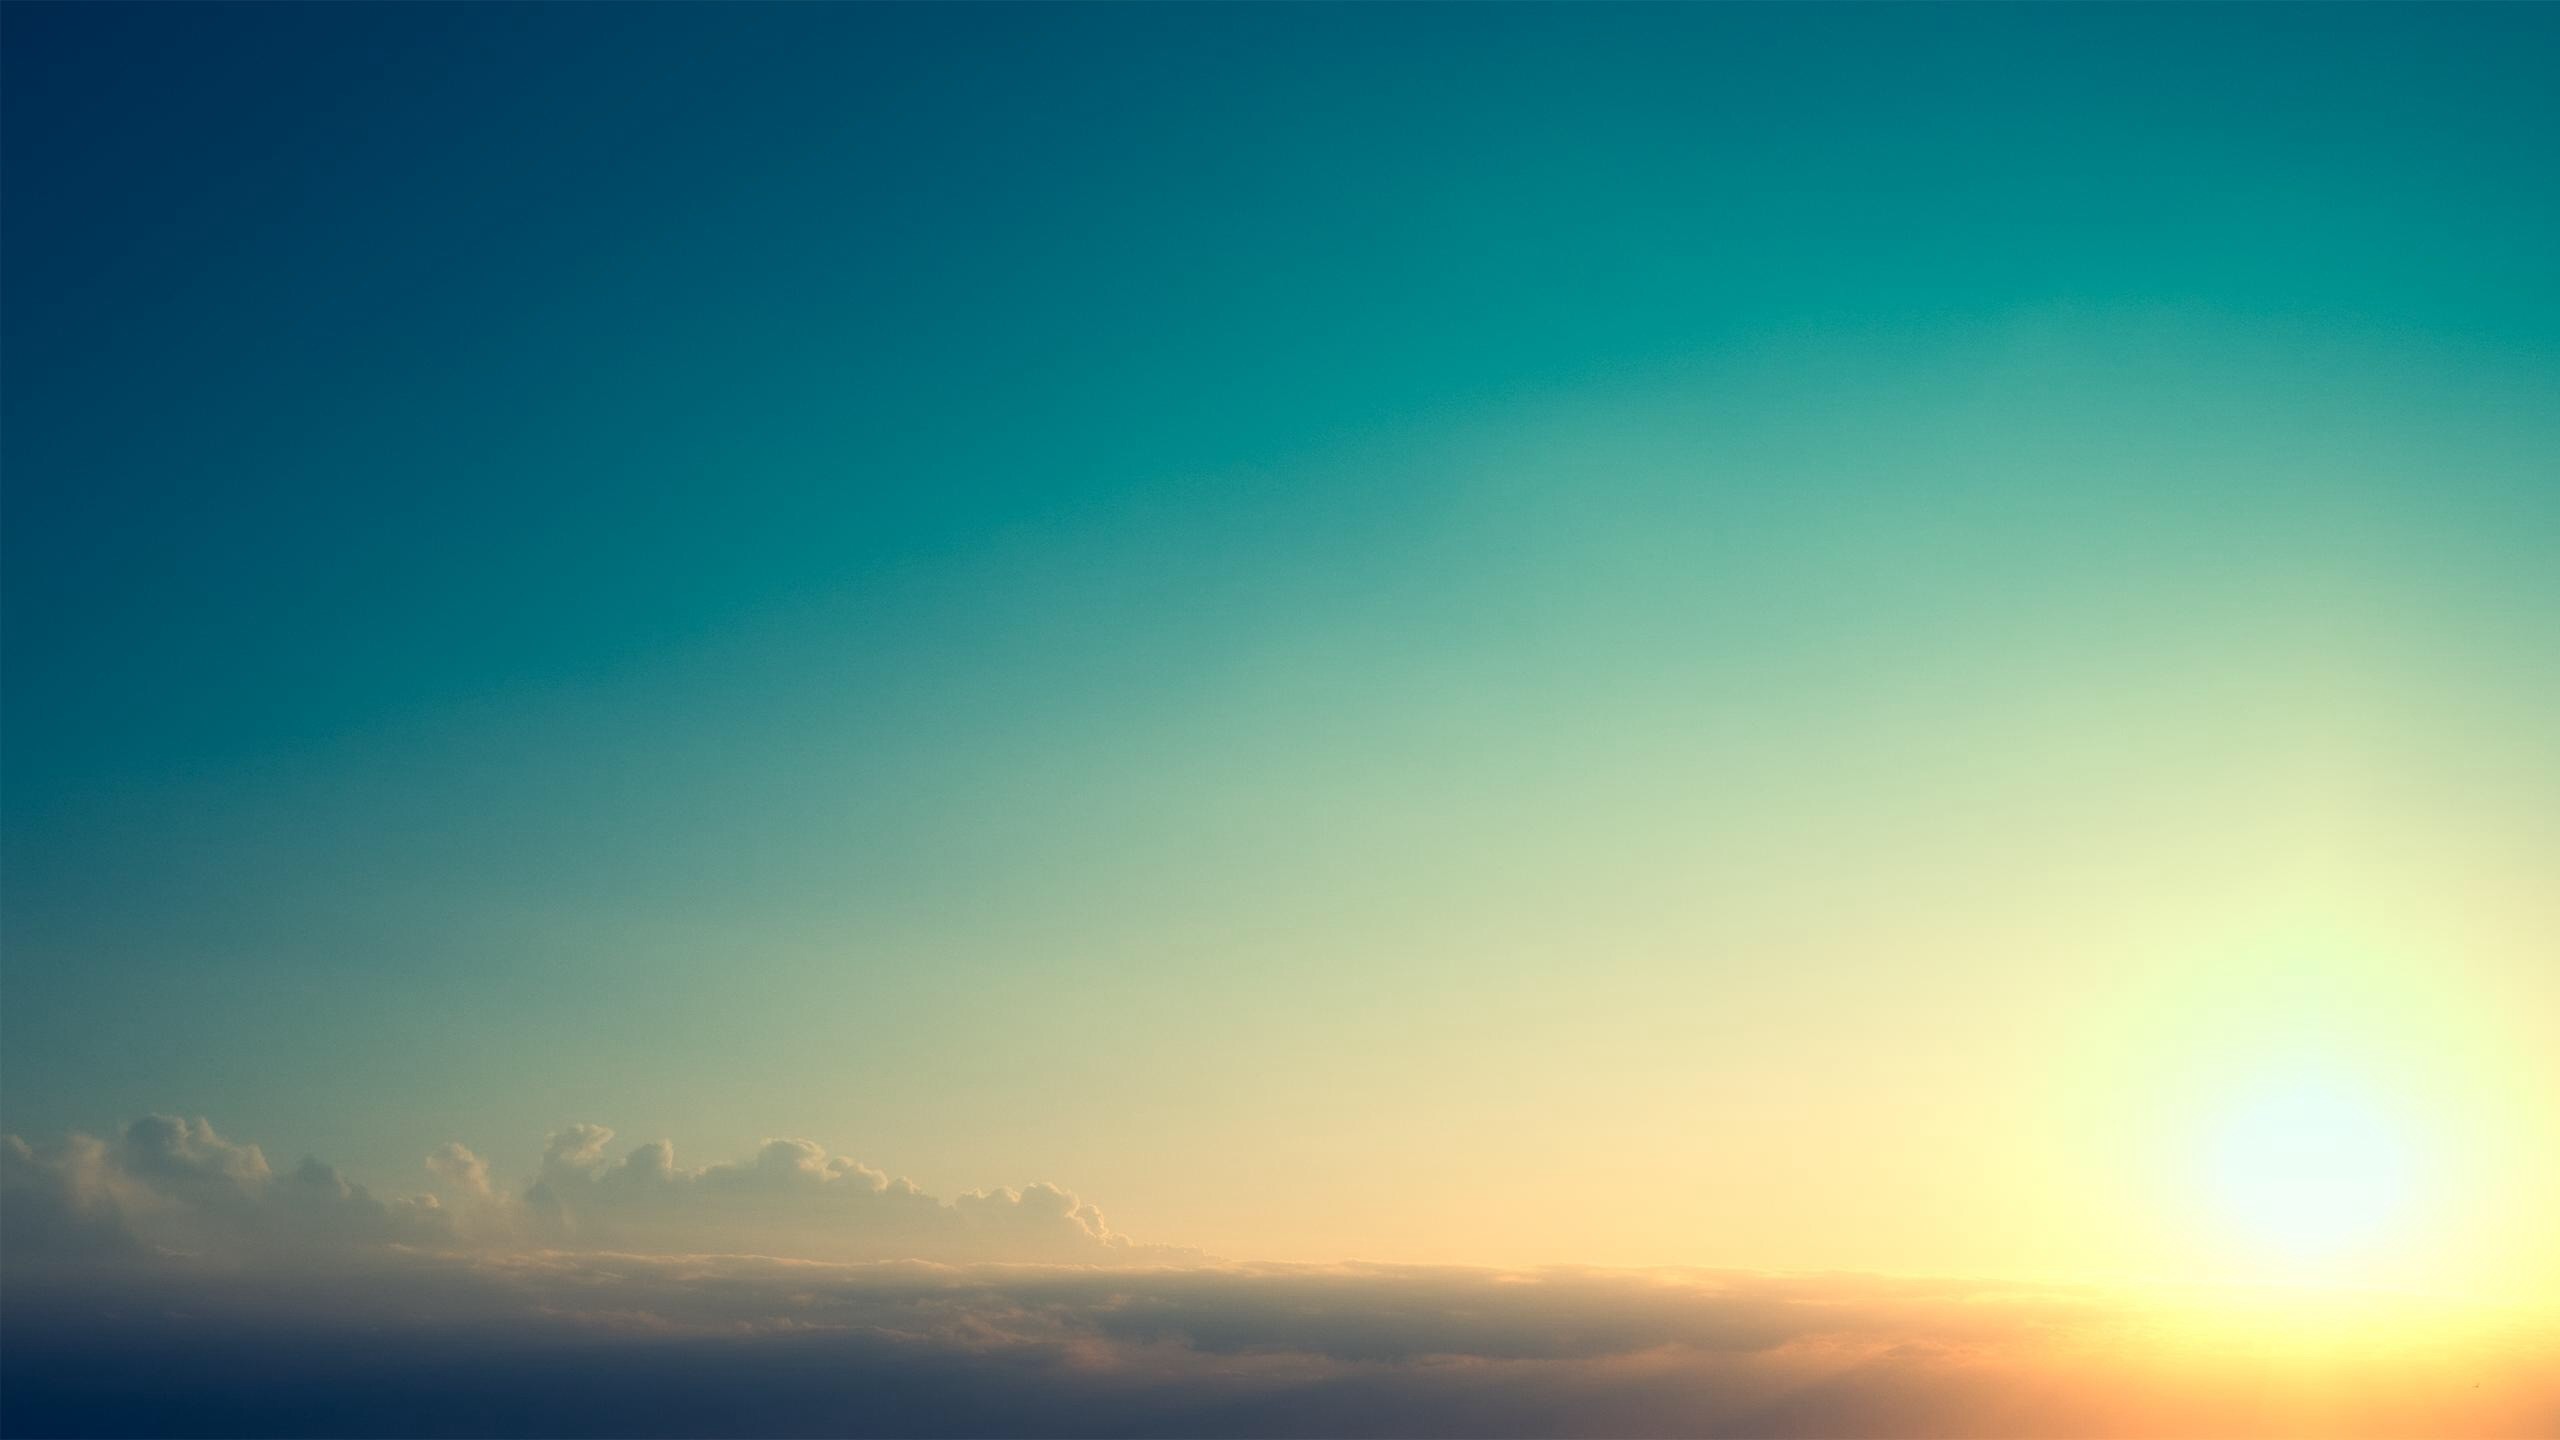 2560x1440 Calming Clouds and Sun. Find this Pin and more on Skyscapes Wallpaper ...